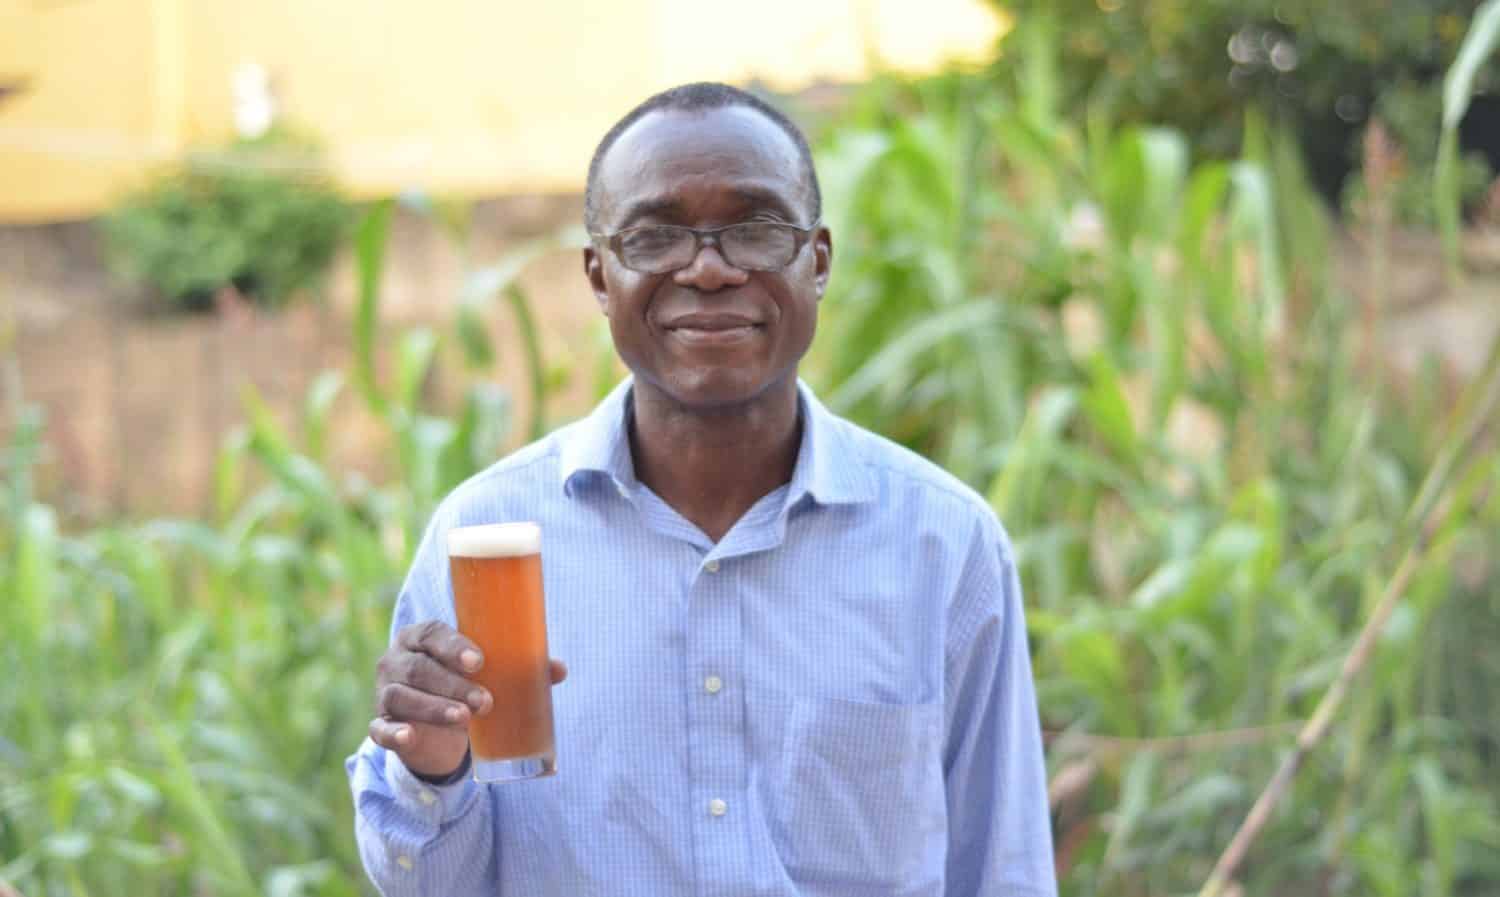 Sick of the commercial beers? In Ghana sorghum, sugarcane, and cashew apples are giving Ghanaian drinkers alternatives to imports.